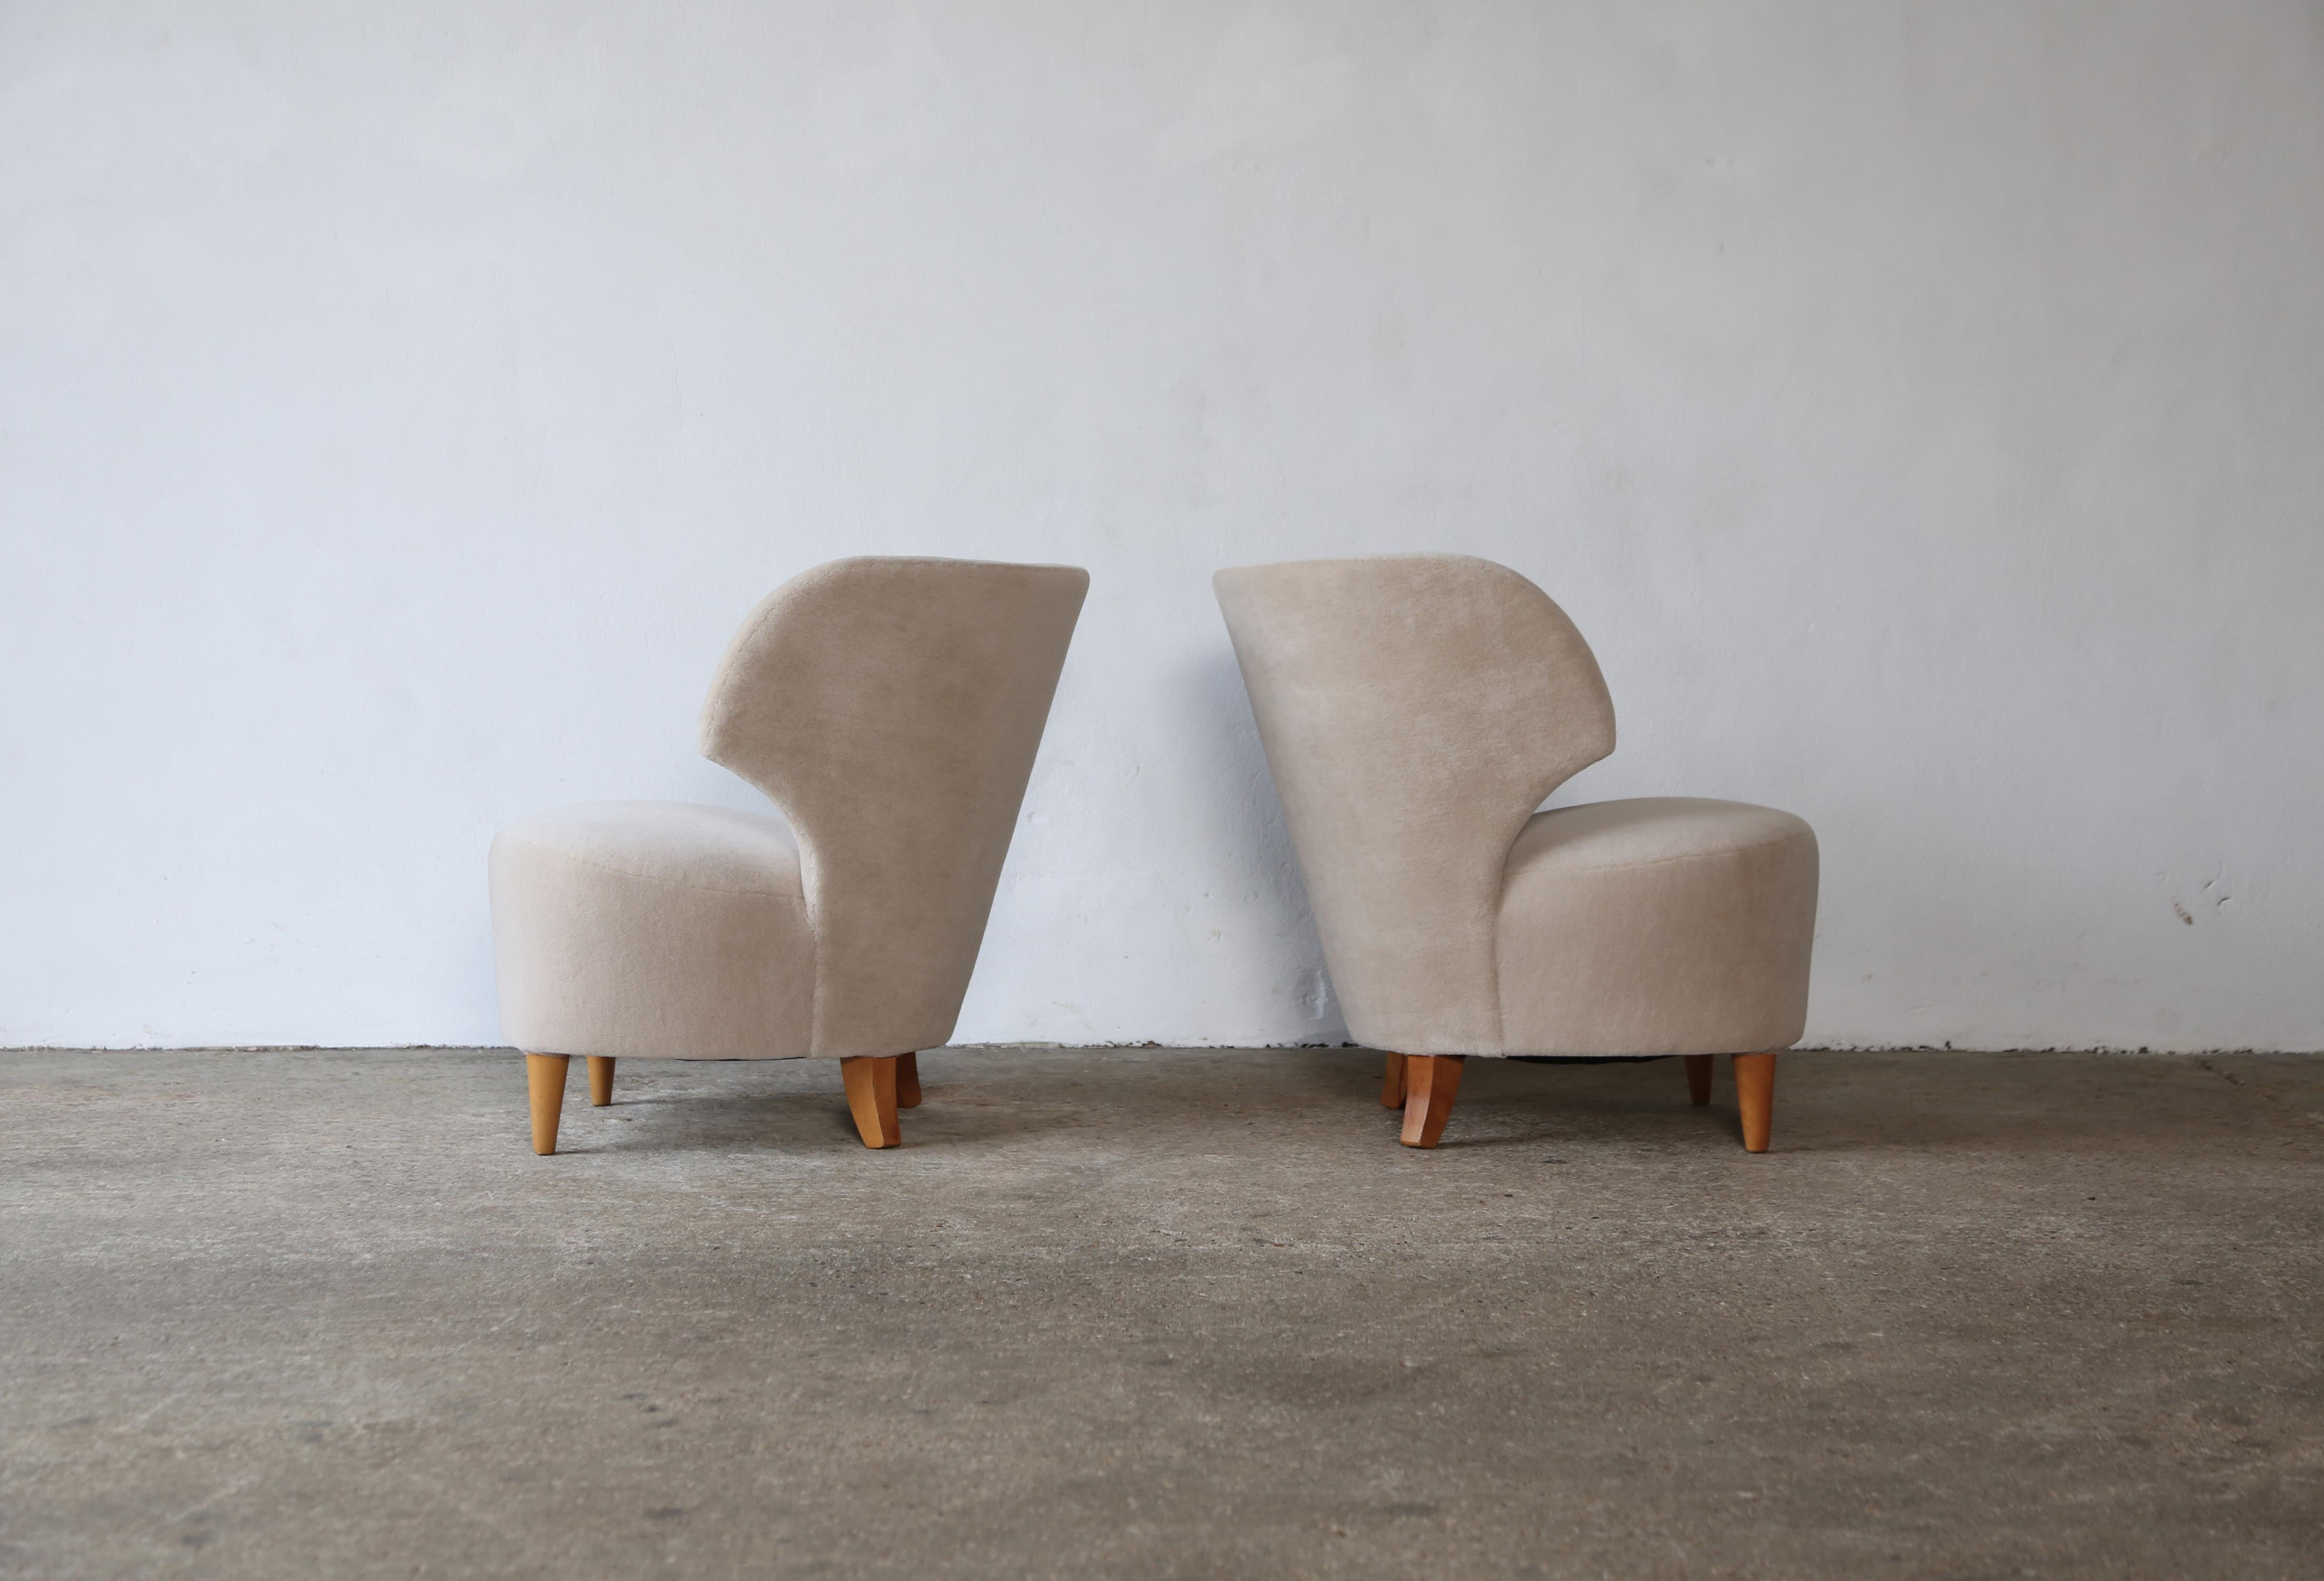 20th Century Pair of Carl-Johan Boman Chairs, Finland, 1940s, Newly Upholstered in Alpaca For Sale